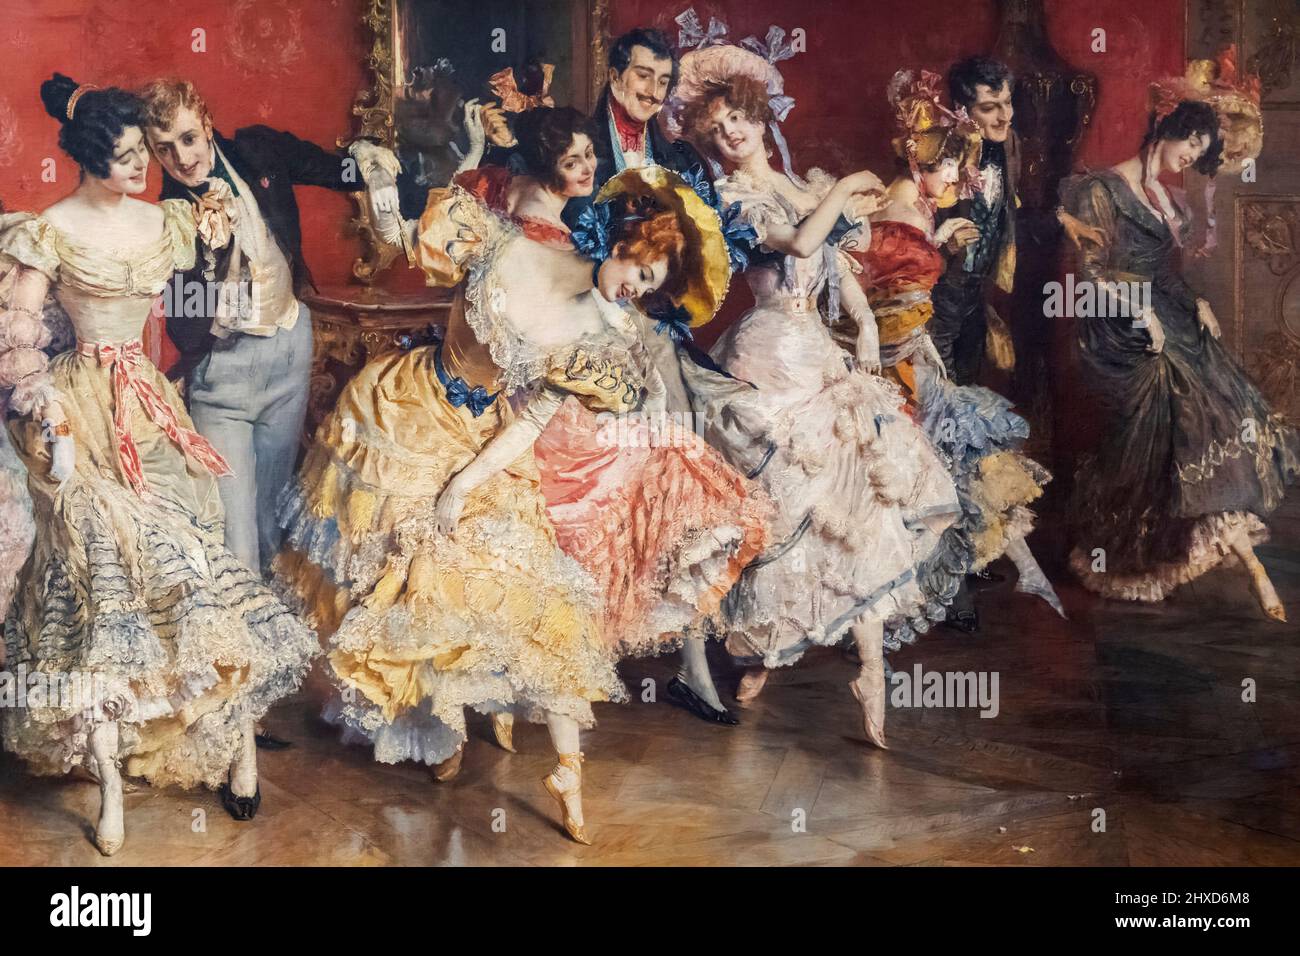 England, Dorset, Bournemouth, Russell-Cotes Museum, Painting titled 'The Minuet' by Leopold Schmutzler dated 1900 Stock Photo